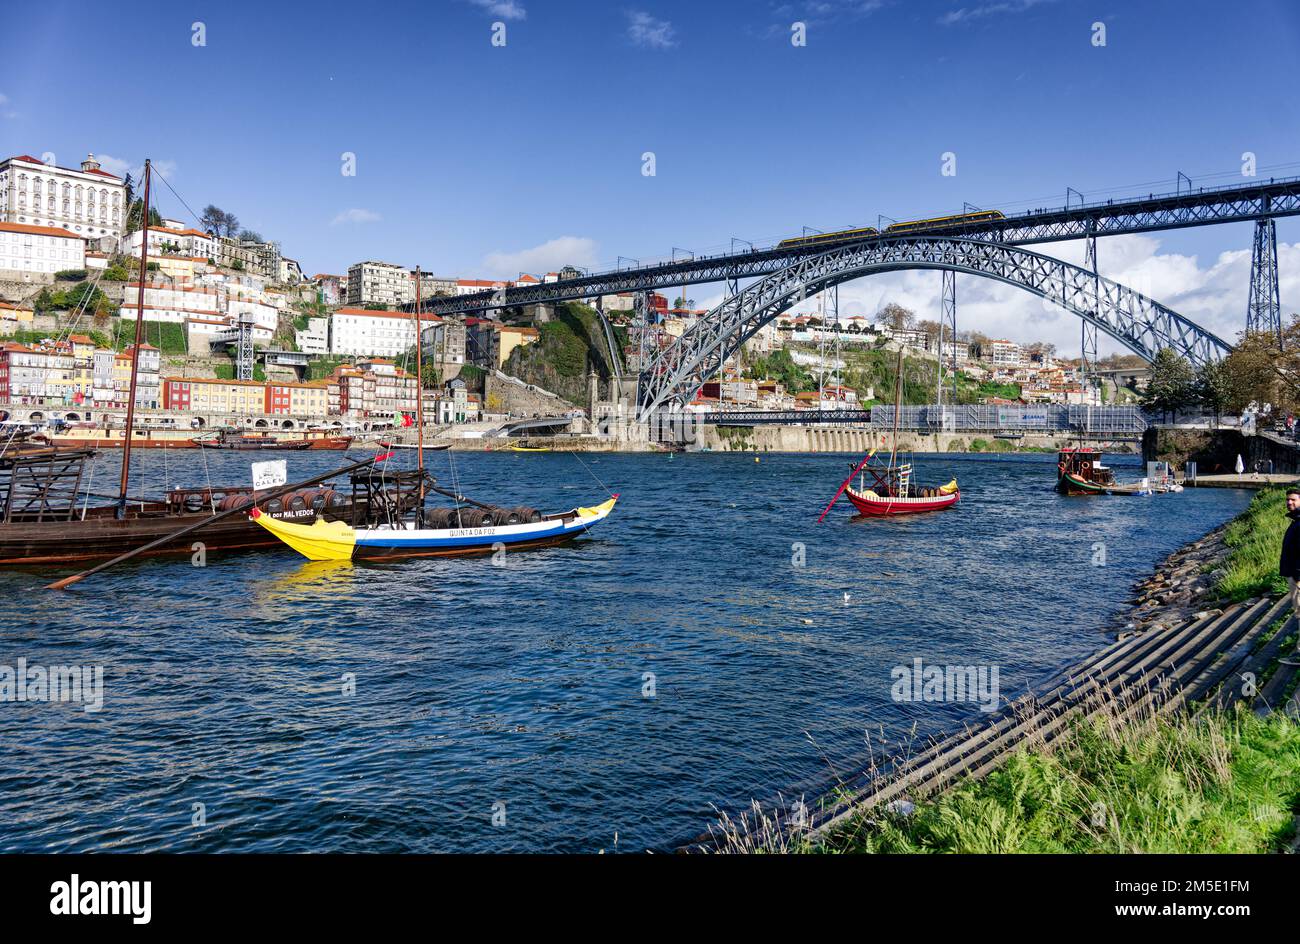 Boat on the River Douro in Porto, with port wine barrels for Calem and Graham's before the Dom Luis bridge by Eiffel, Portugal Stock Photo